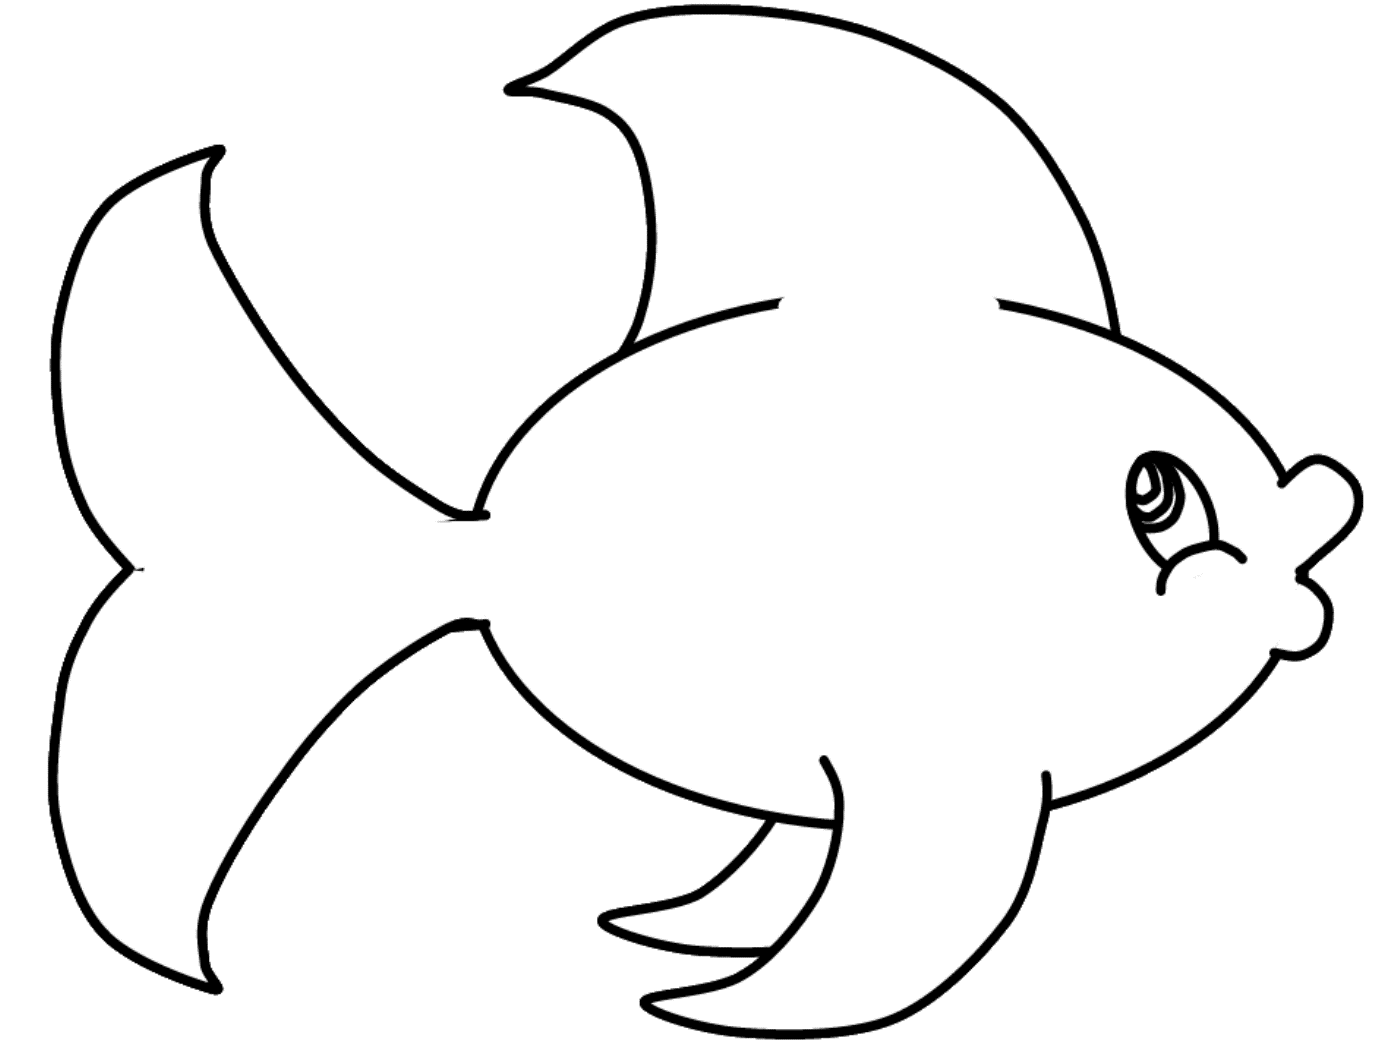 Simple Fish Drawings - ClipArt Best